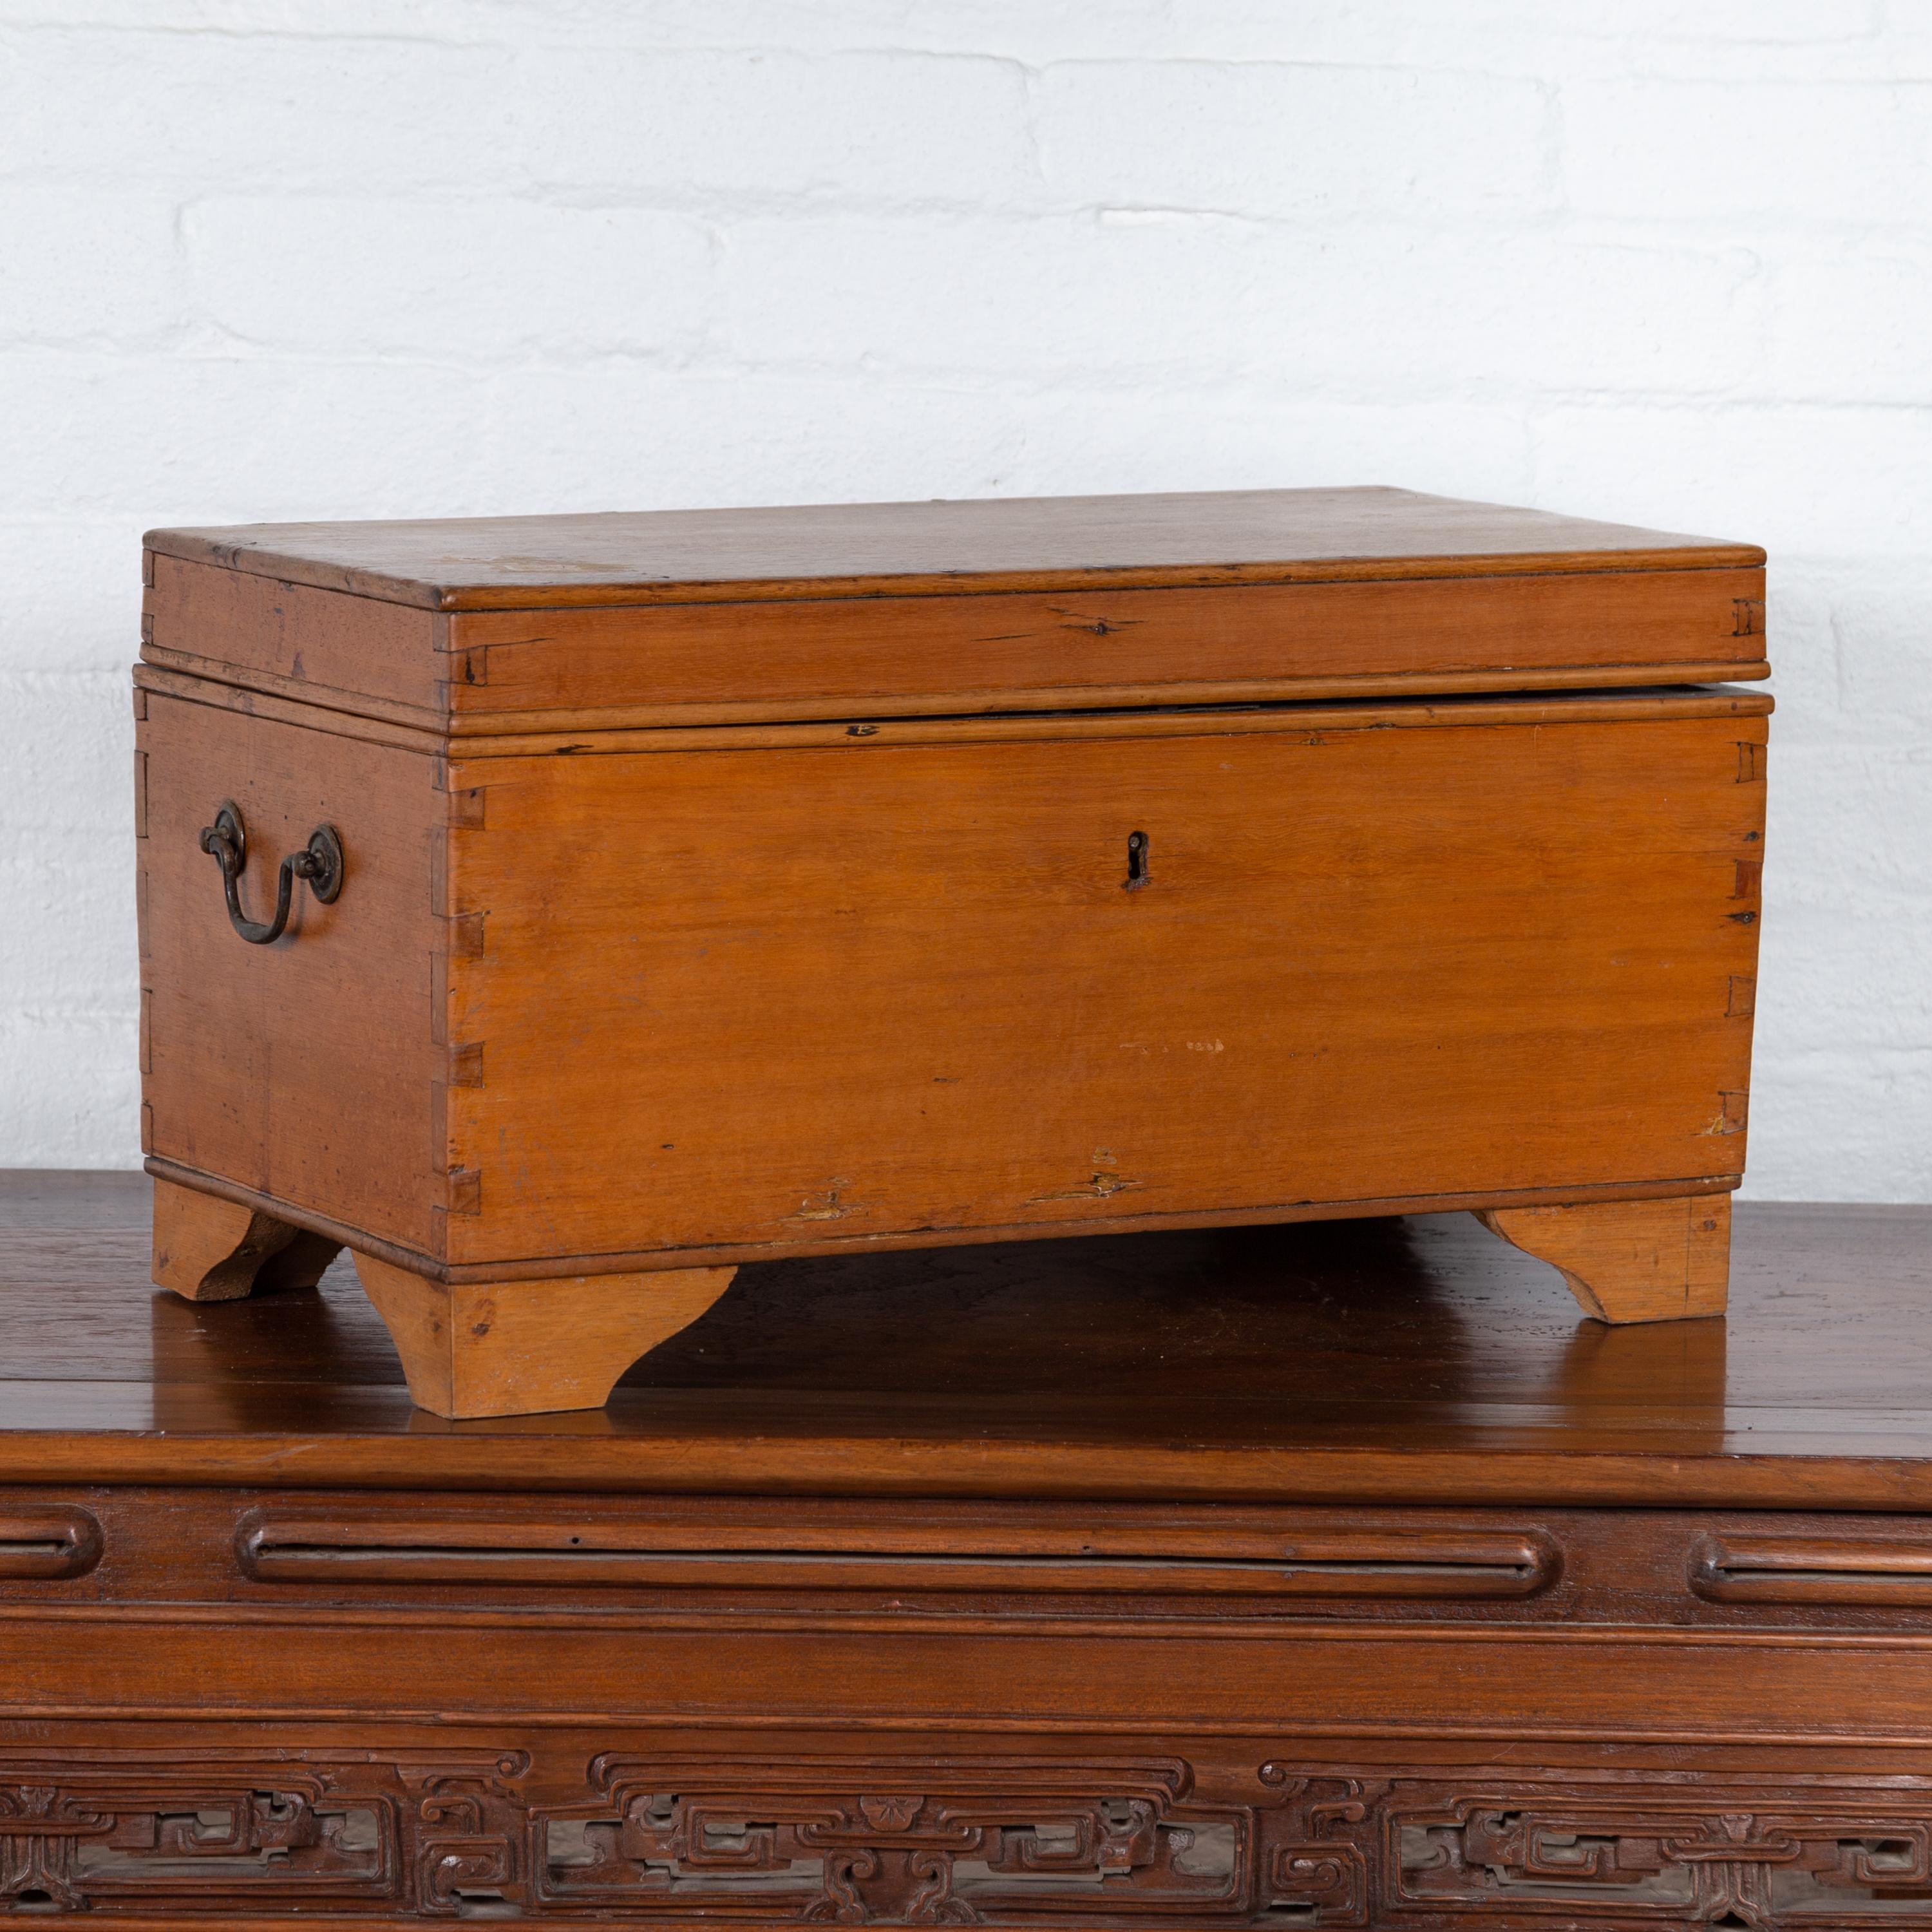 An Indonesian antique wooden decorative box from the early 20th century, with red lacquered interior lid, lateral handles and bracket feet. Created in Indonesia during the early years of the 20th century, this charming wooden box features a linear